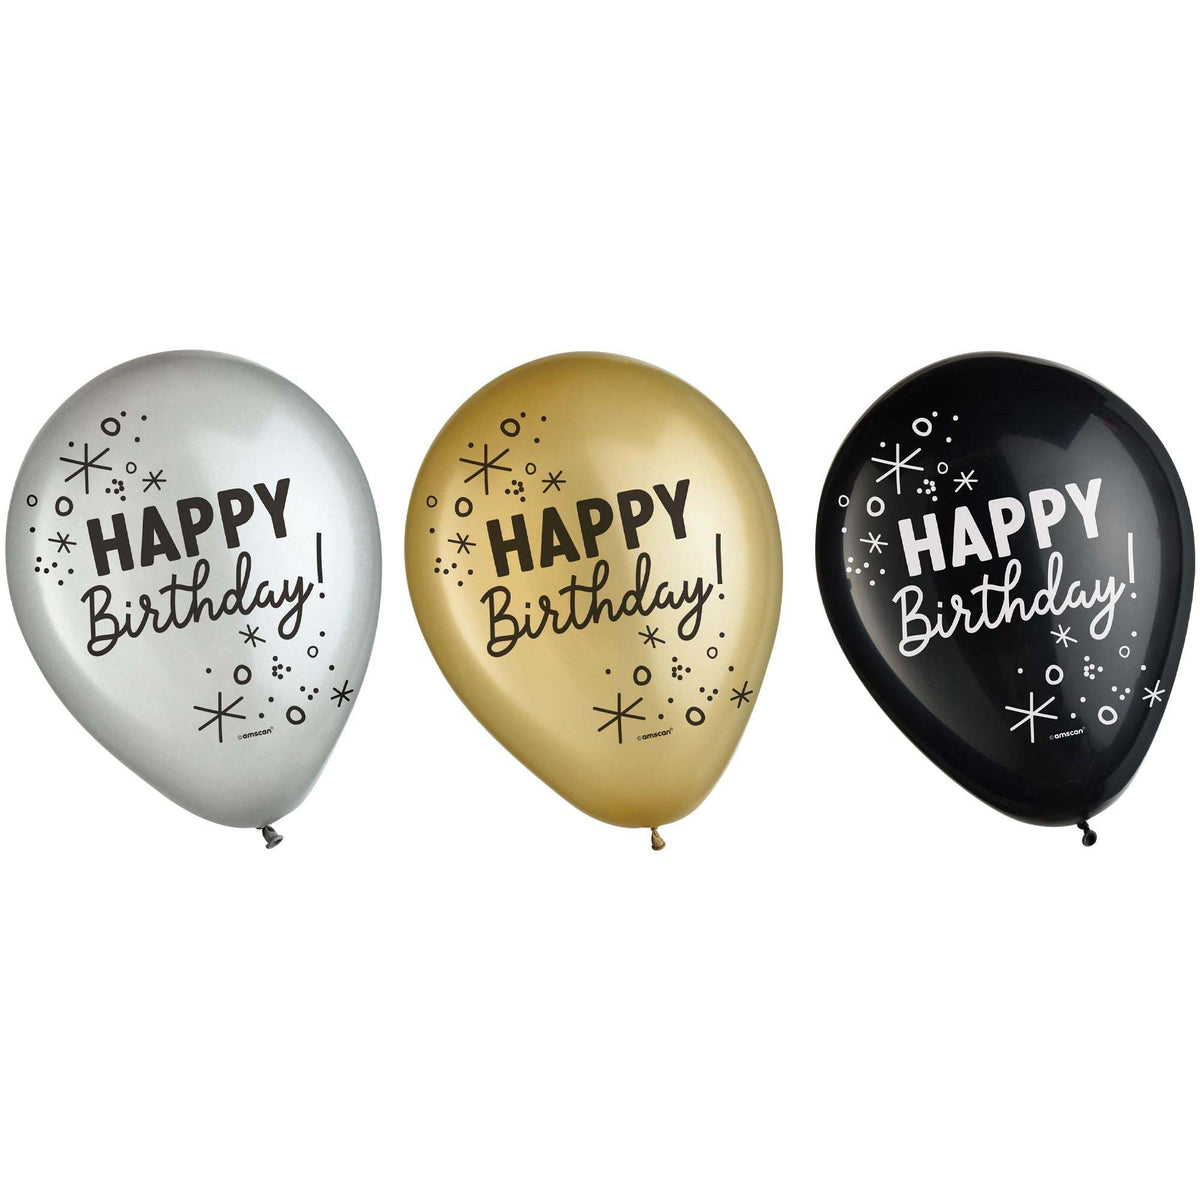 AMSCAN CA General Birthday Happy Birthday Printed Latex Baloons, Silver, Gold and Black, 12 Inches, 15 Count